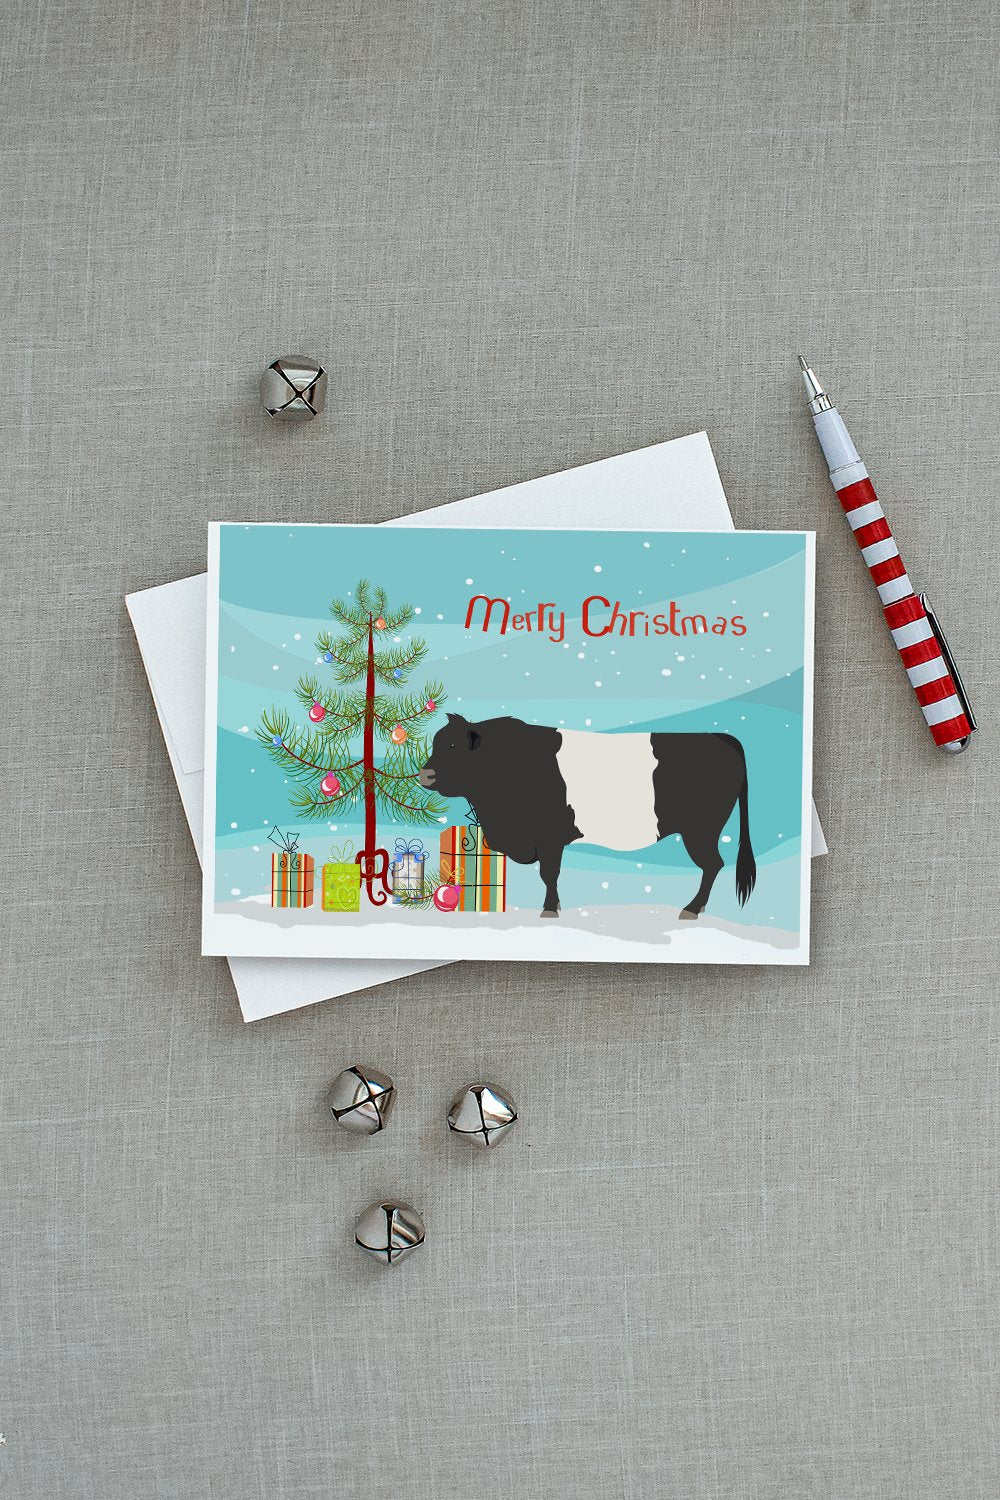 Belted Galloway Cow Christmas Greeting Cards and Envelopes Pack of 8 - the-store.com